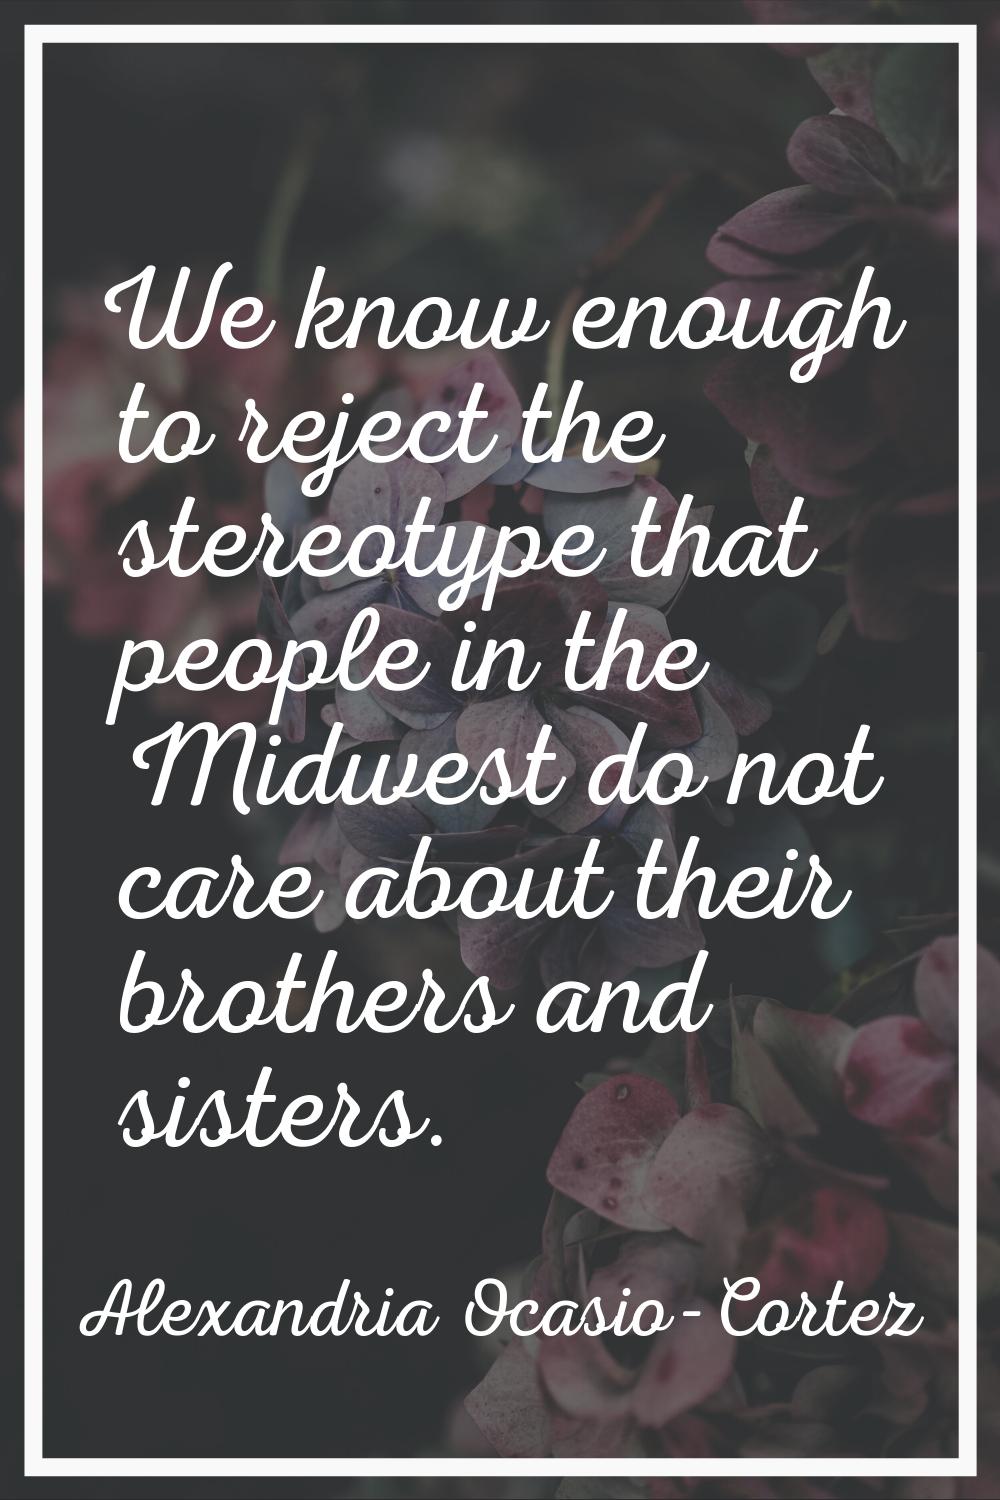 We know enough to reject the stereotype that people in the Midwest do not care about their brothers